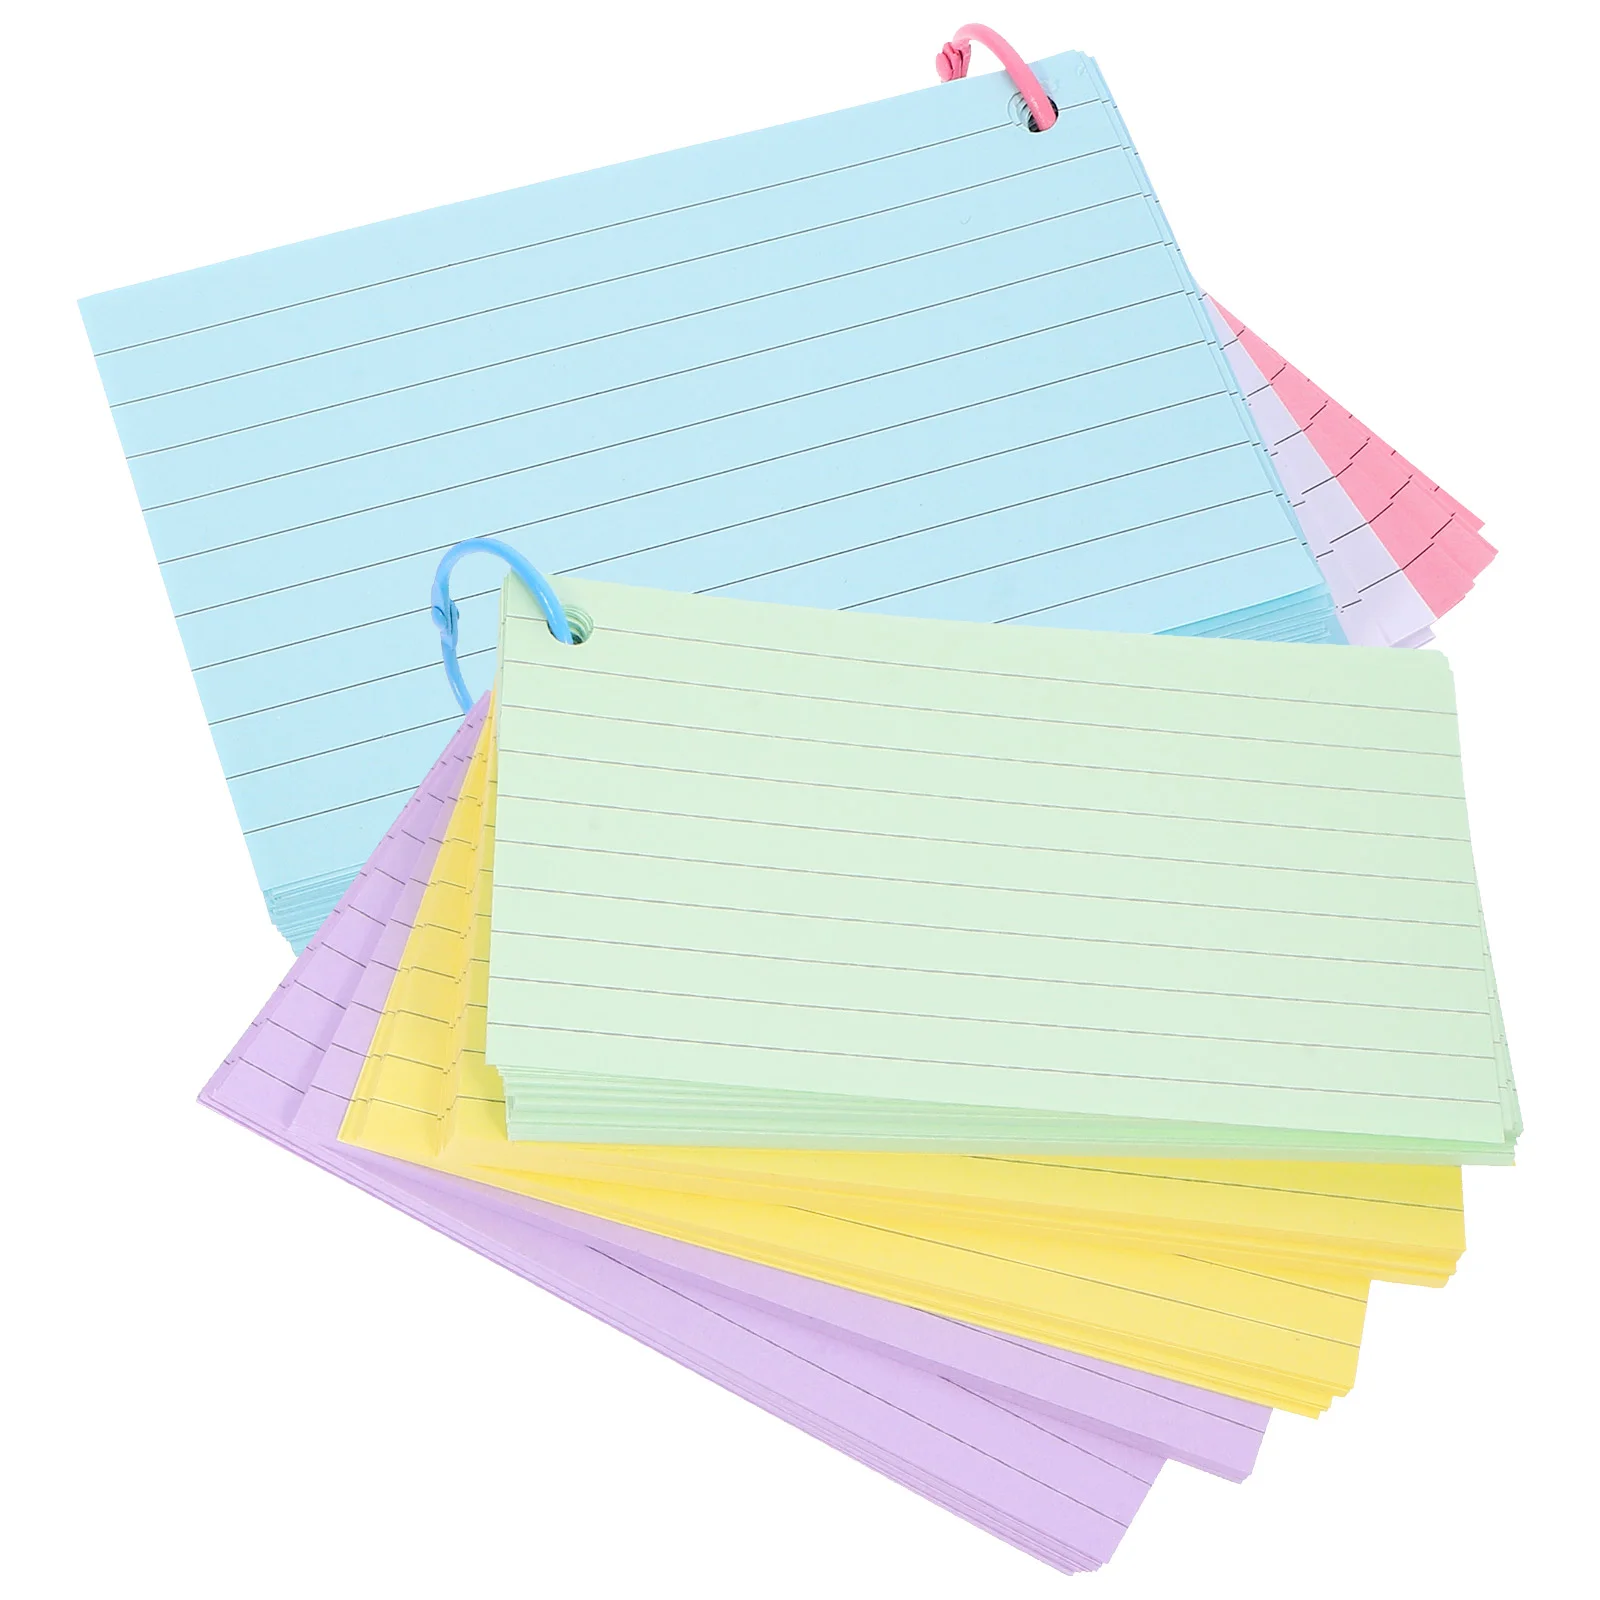 1 Set  Index Cards with Holes Punched Flash Cards with Rings Studying Note Cards for Adults